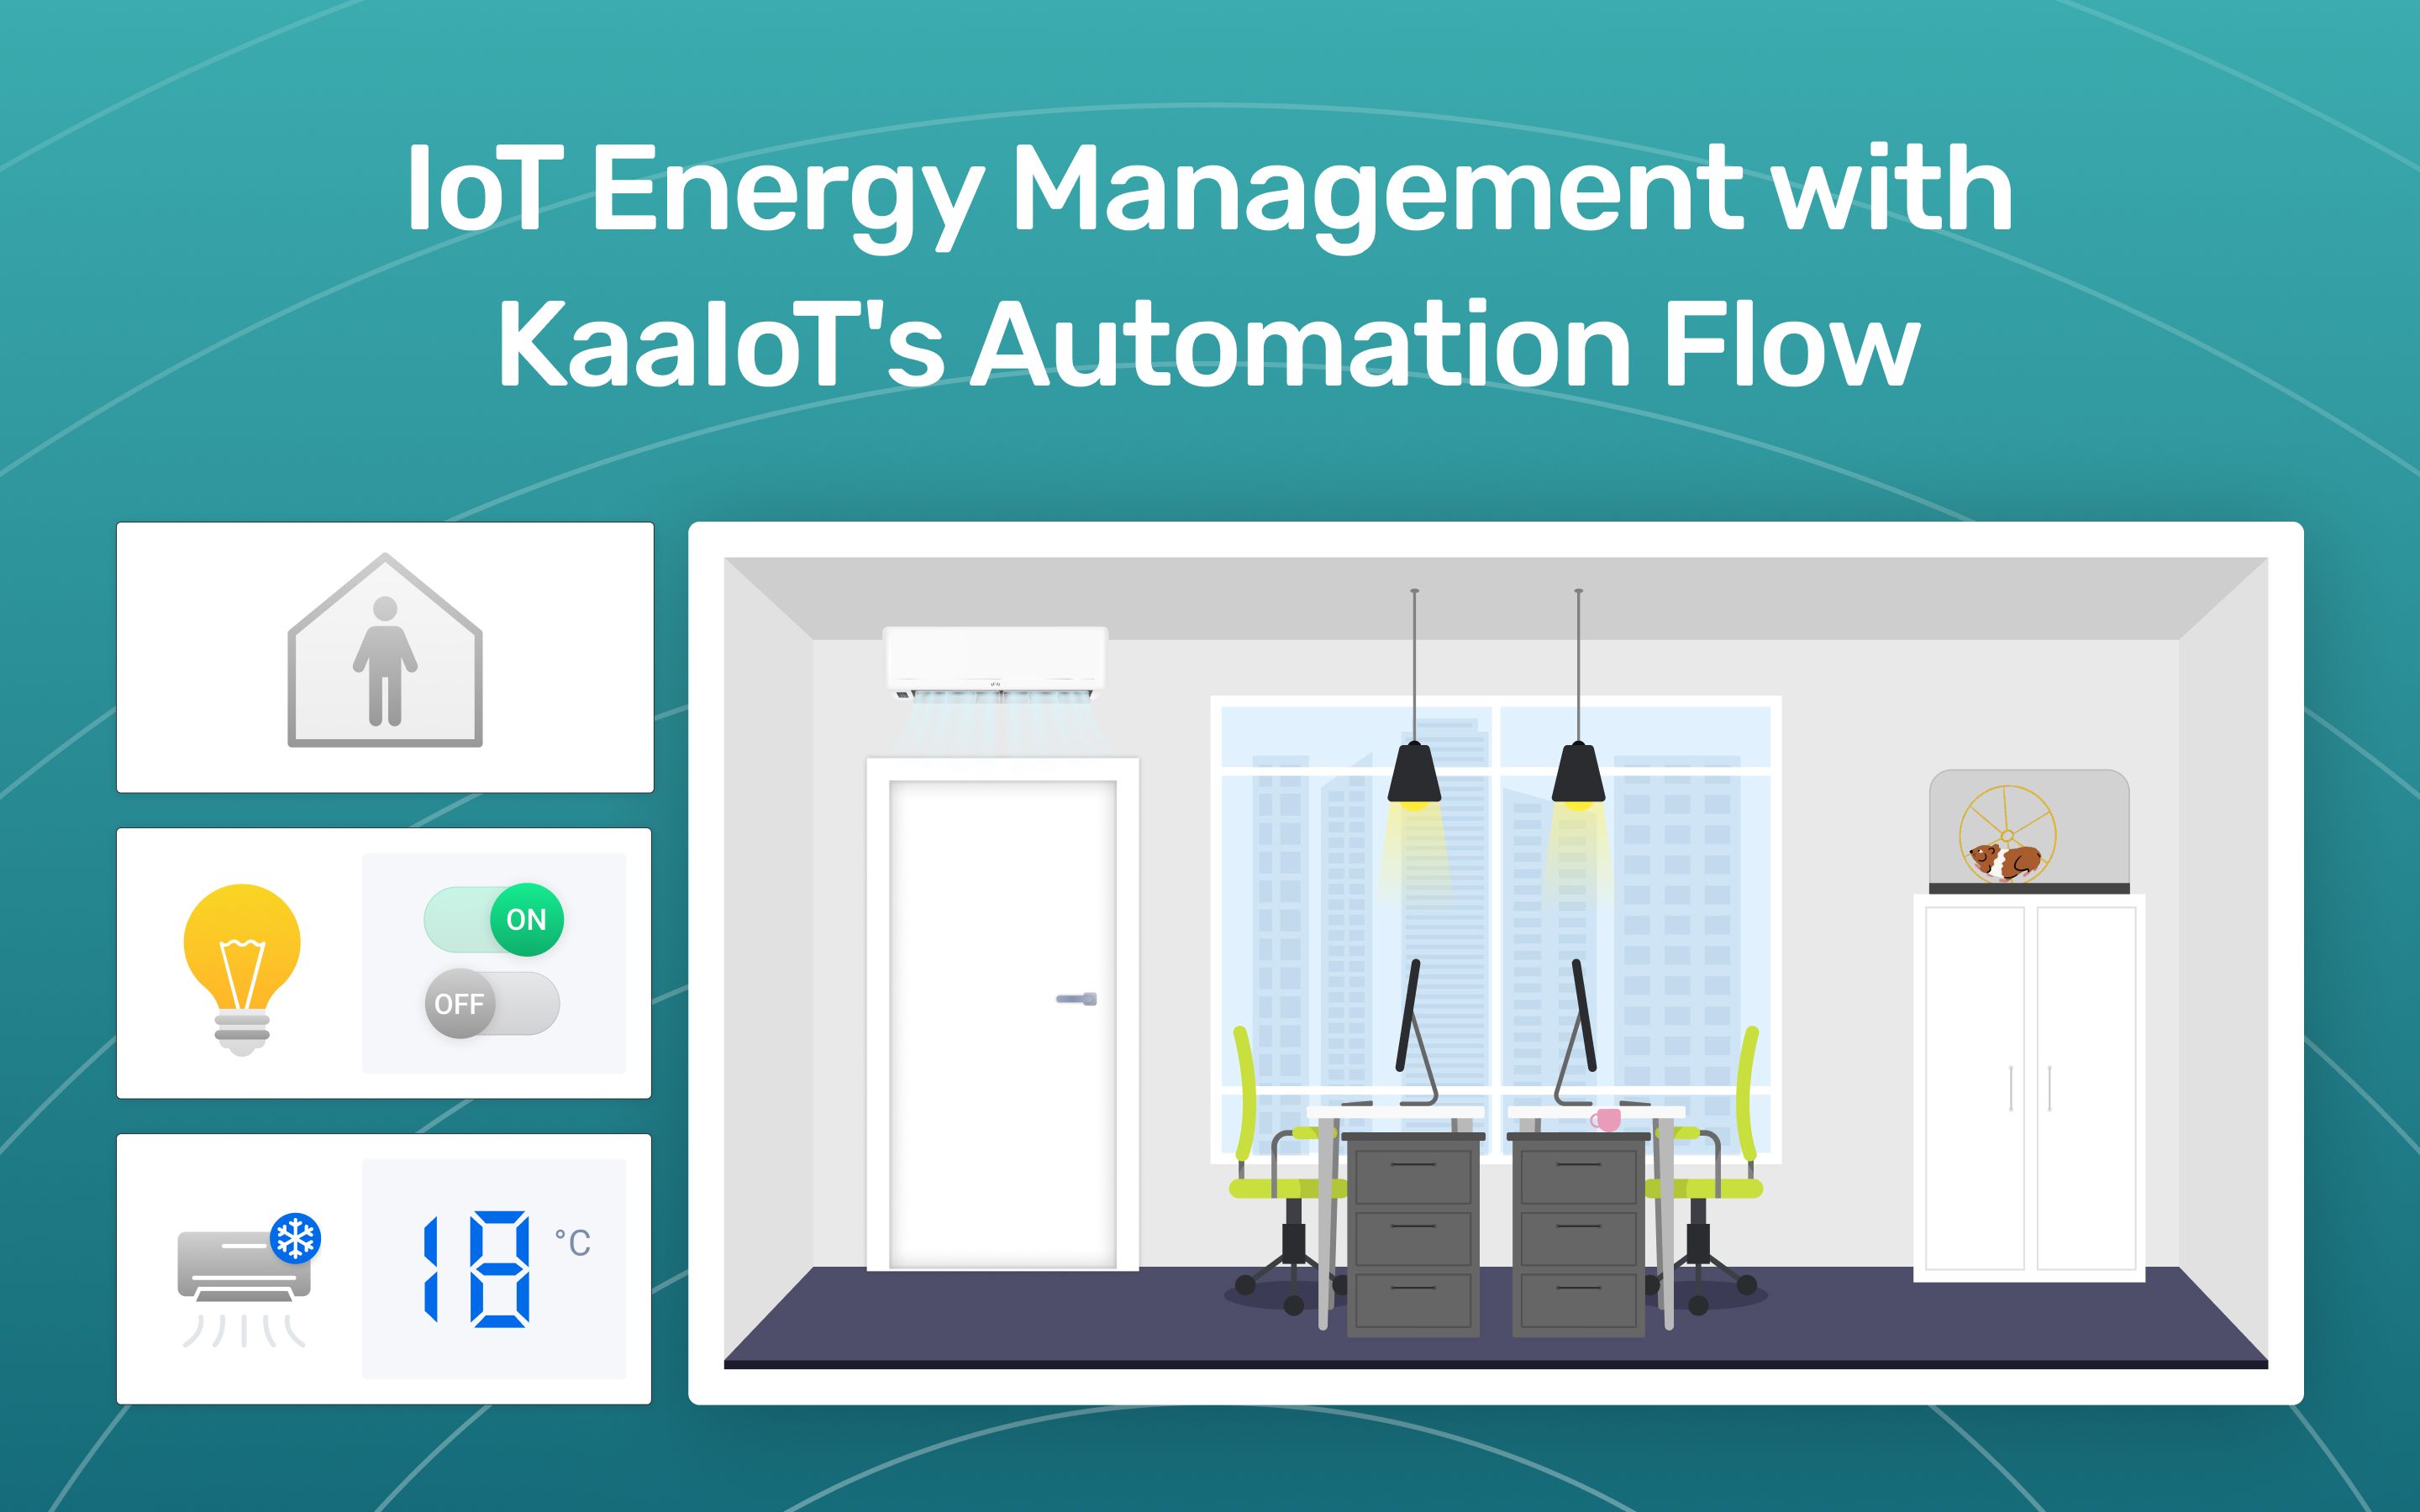 IoT Energy Management with KaaIoT’s Automation Flow